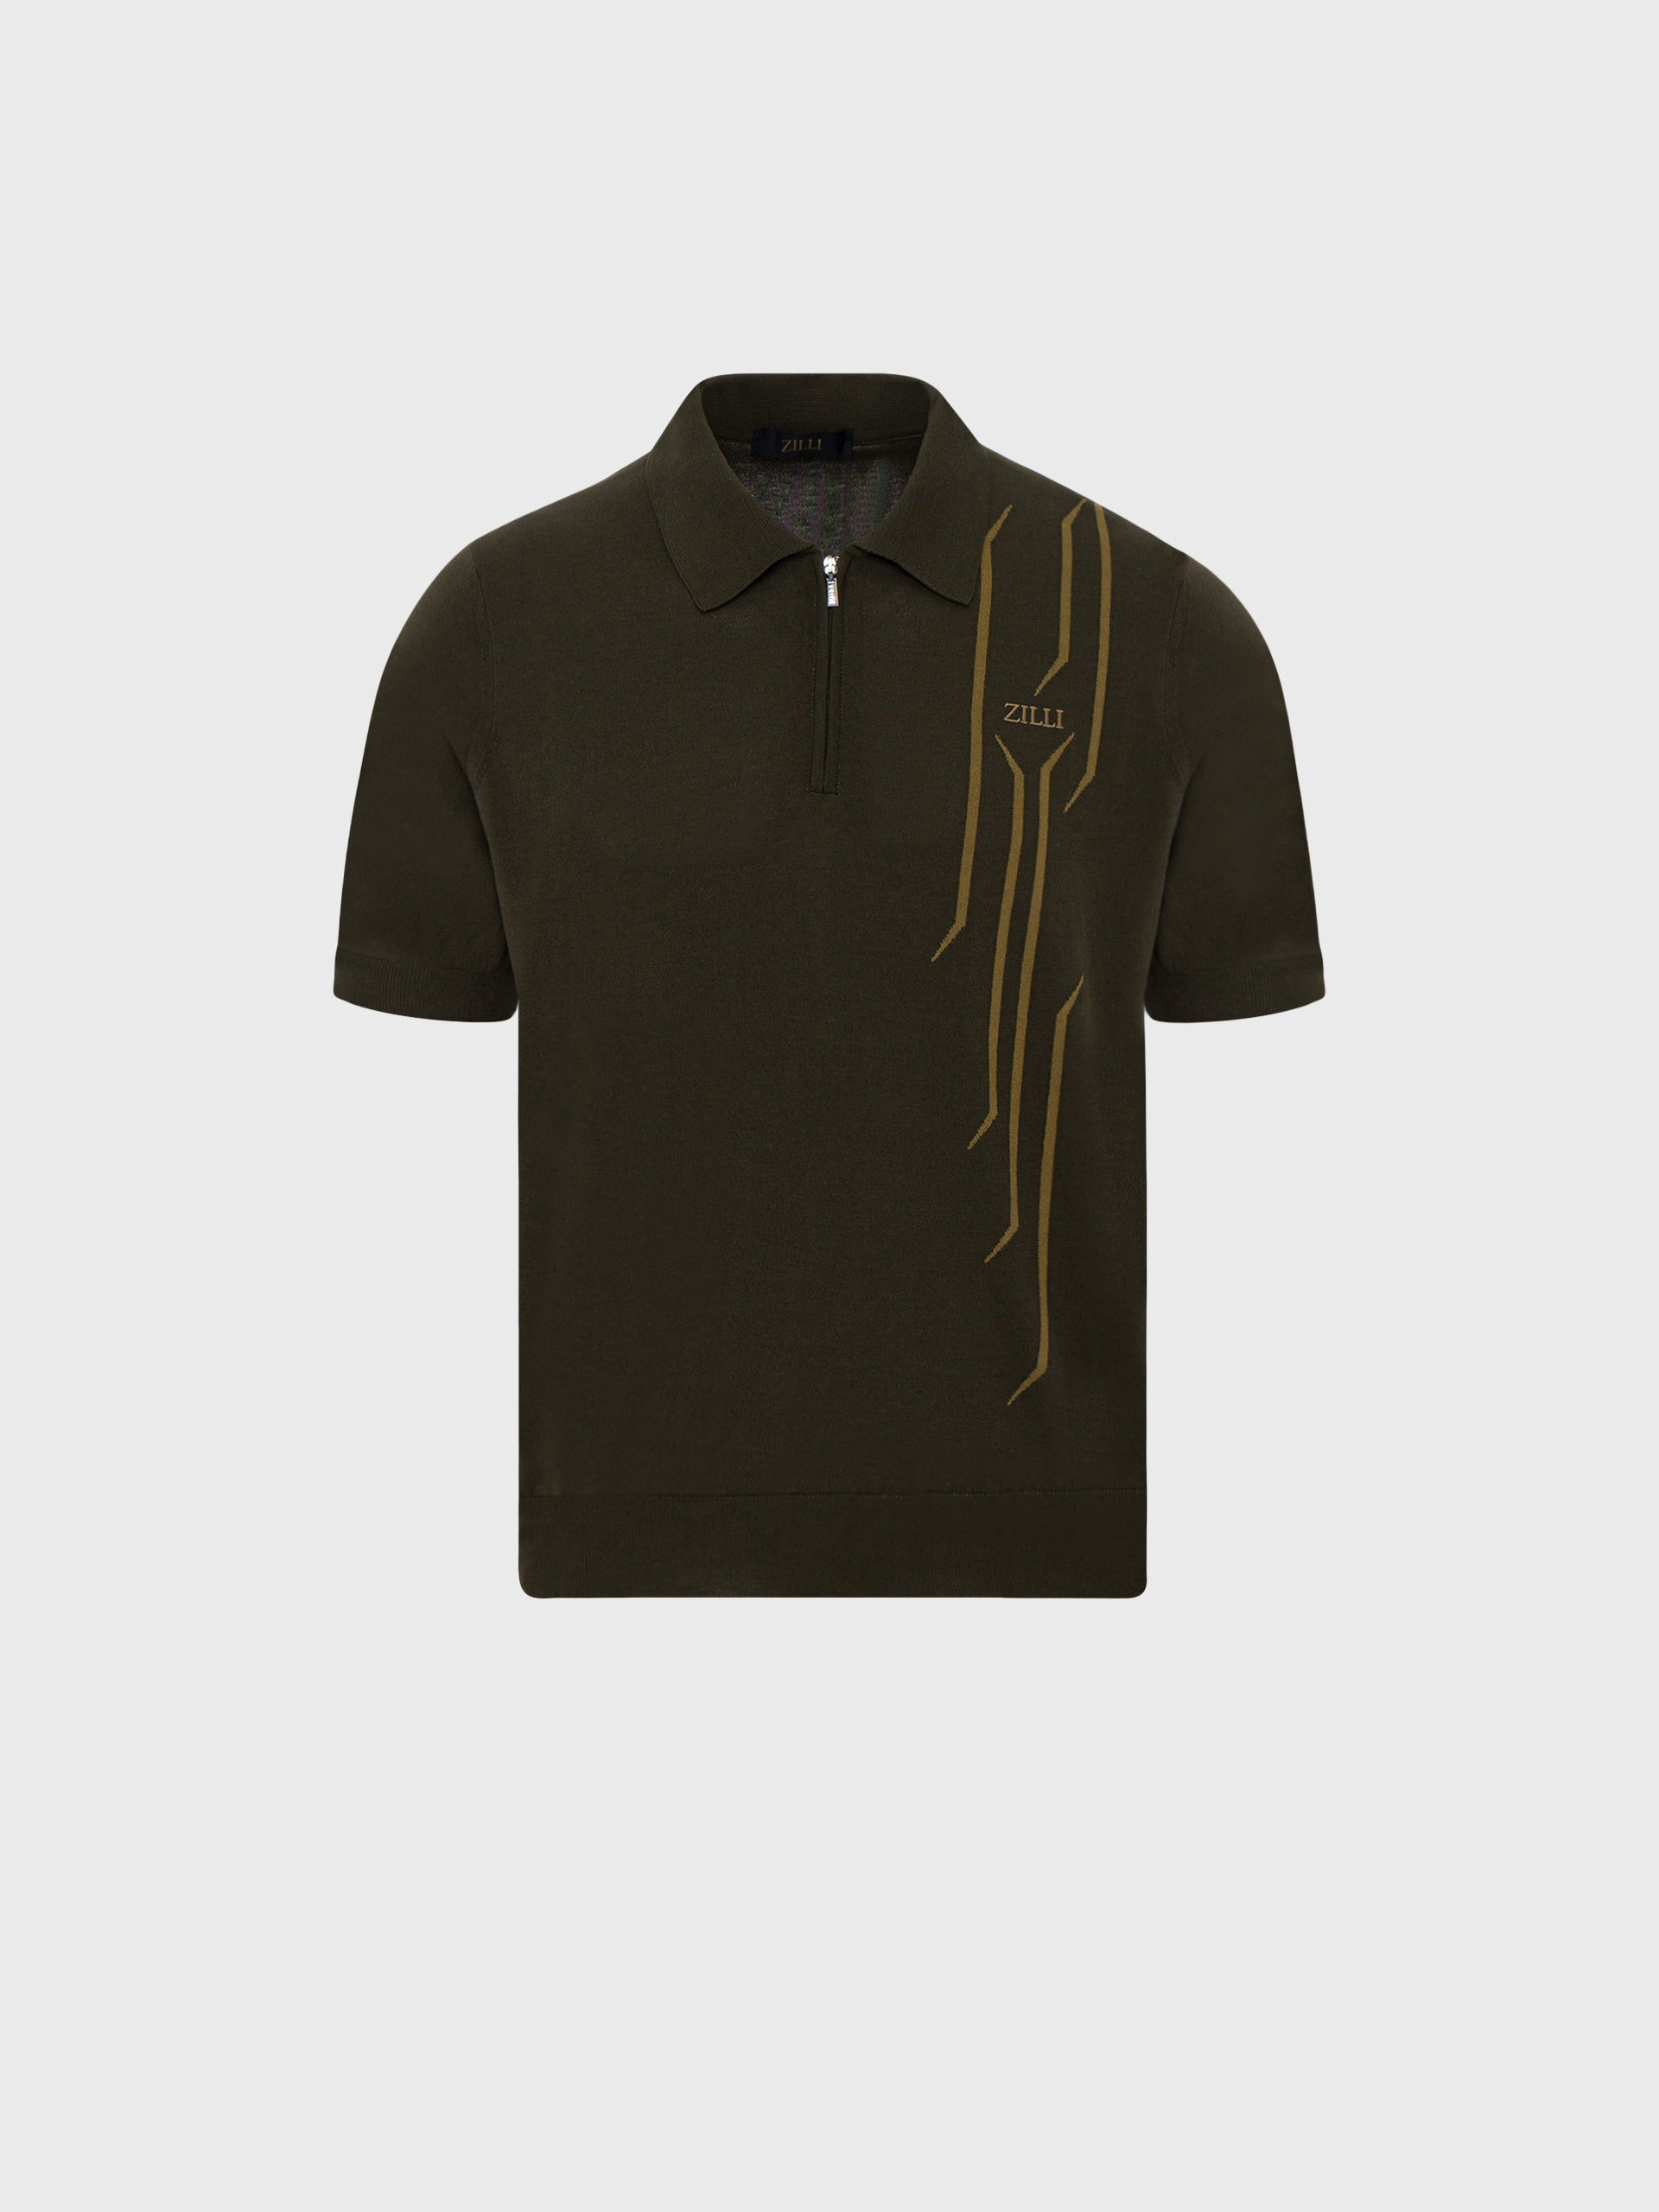 Zipped Polo Shirt with Zilli Lettering